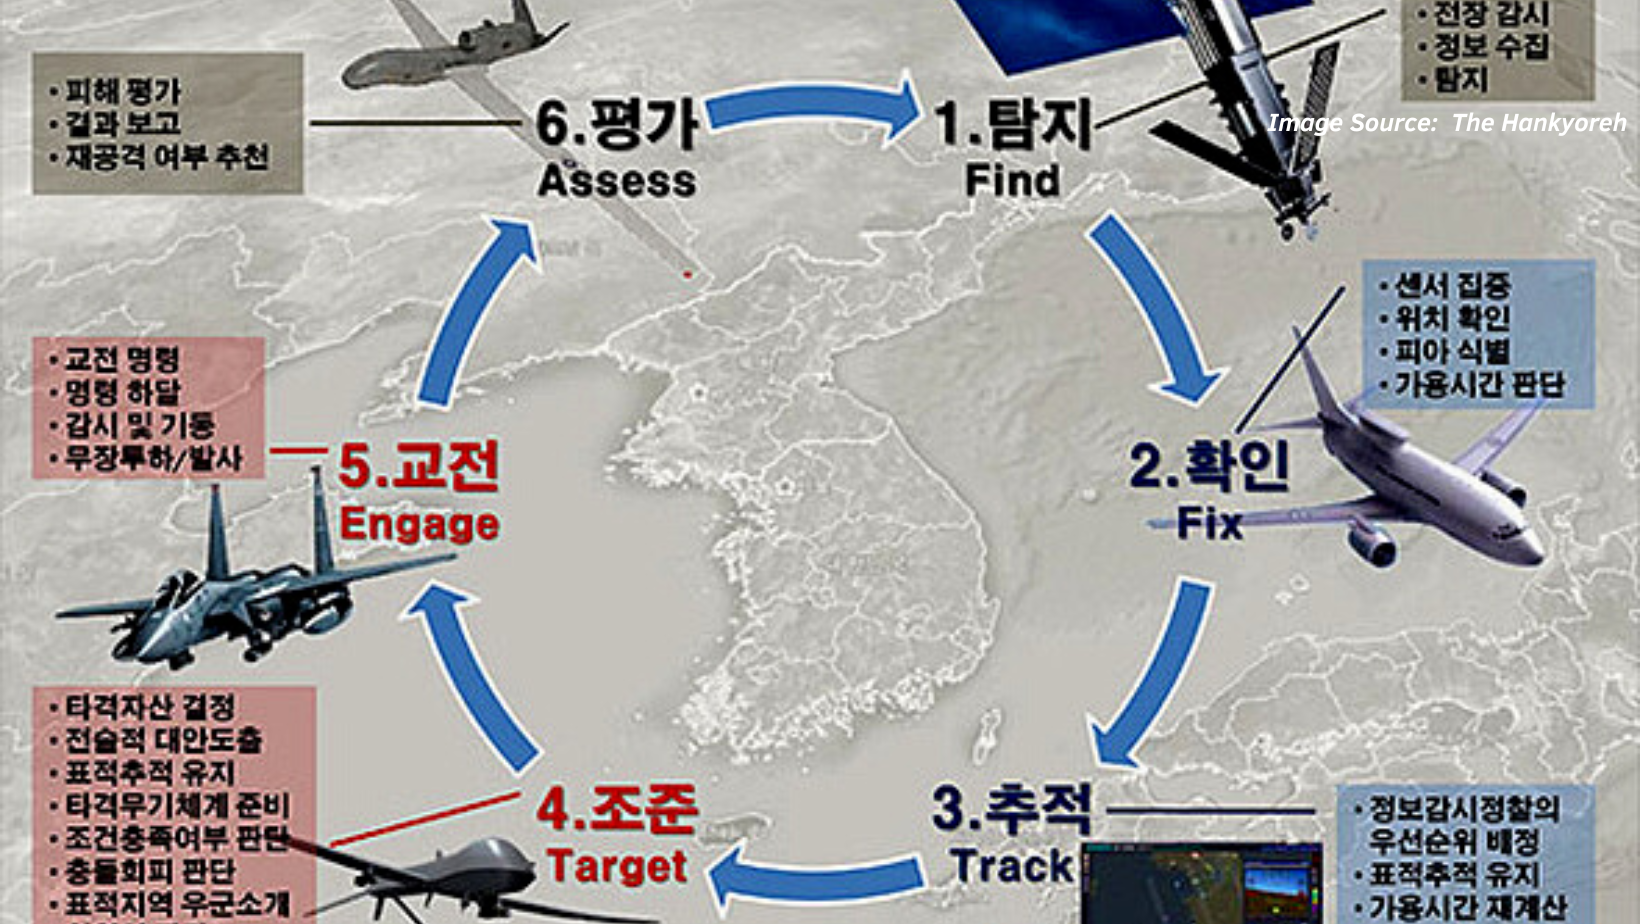 South Korea’s Three-Axis Defence Strategy: Is It An Effective Deterrent?